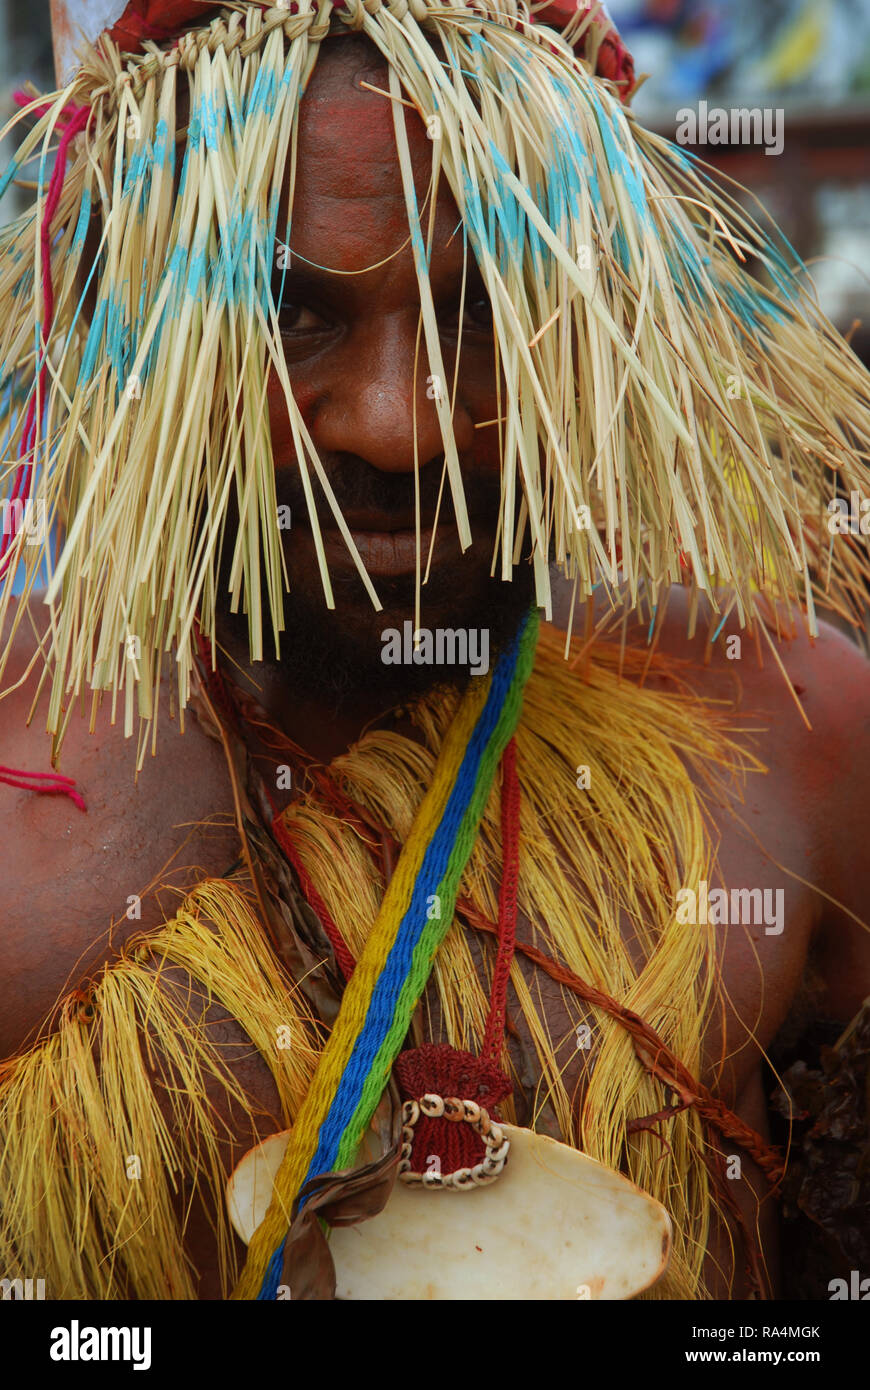 Colourfully dressed and face painted man wearing a straw hat dancing as part of a Sing Sing in Madang, Papua New Guinea. Stock Photo